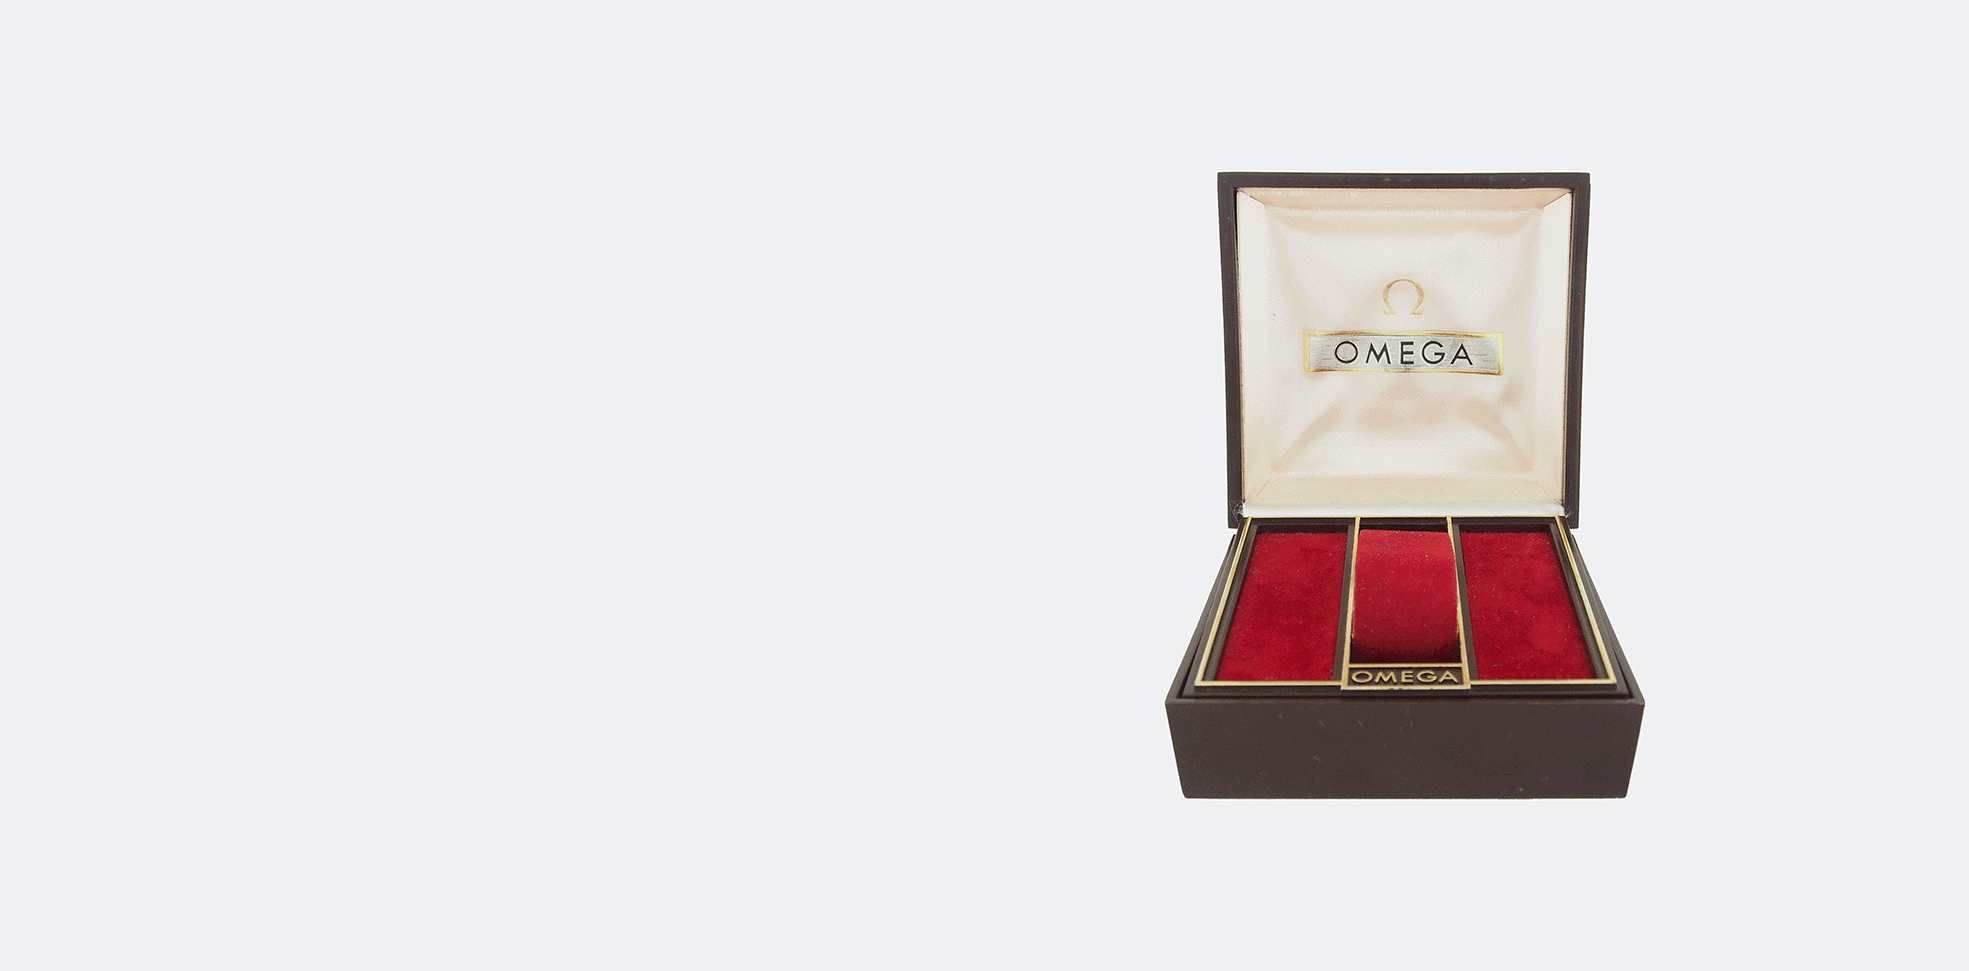 Watch Boxes | Vintage Watch Leader Shop Logo Where to Buy Selection of Mens Vintage and Pre Owned Watches for Sale online on your wrist with free shipping